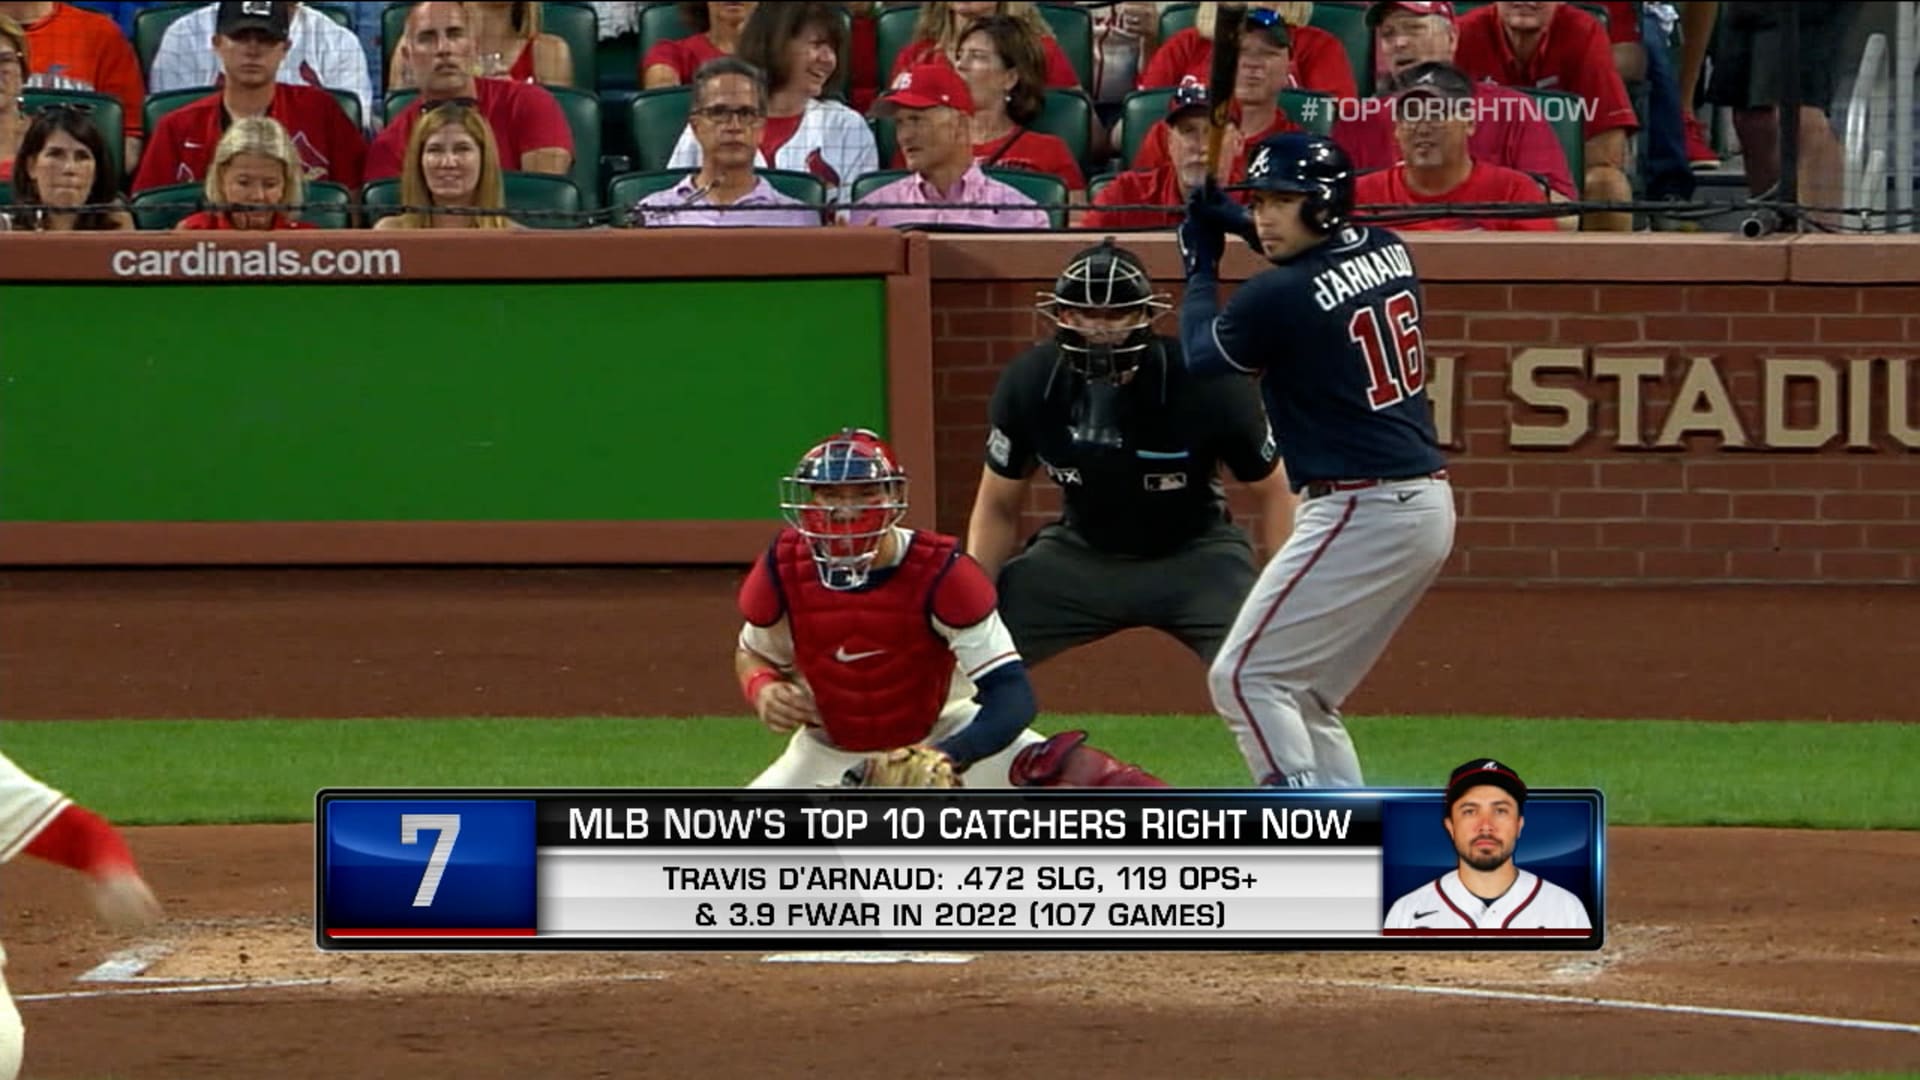 MLB Stories - MLB Now's Top 10 Catchers Right Now